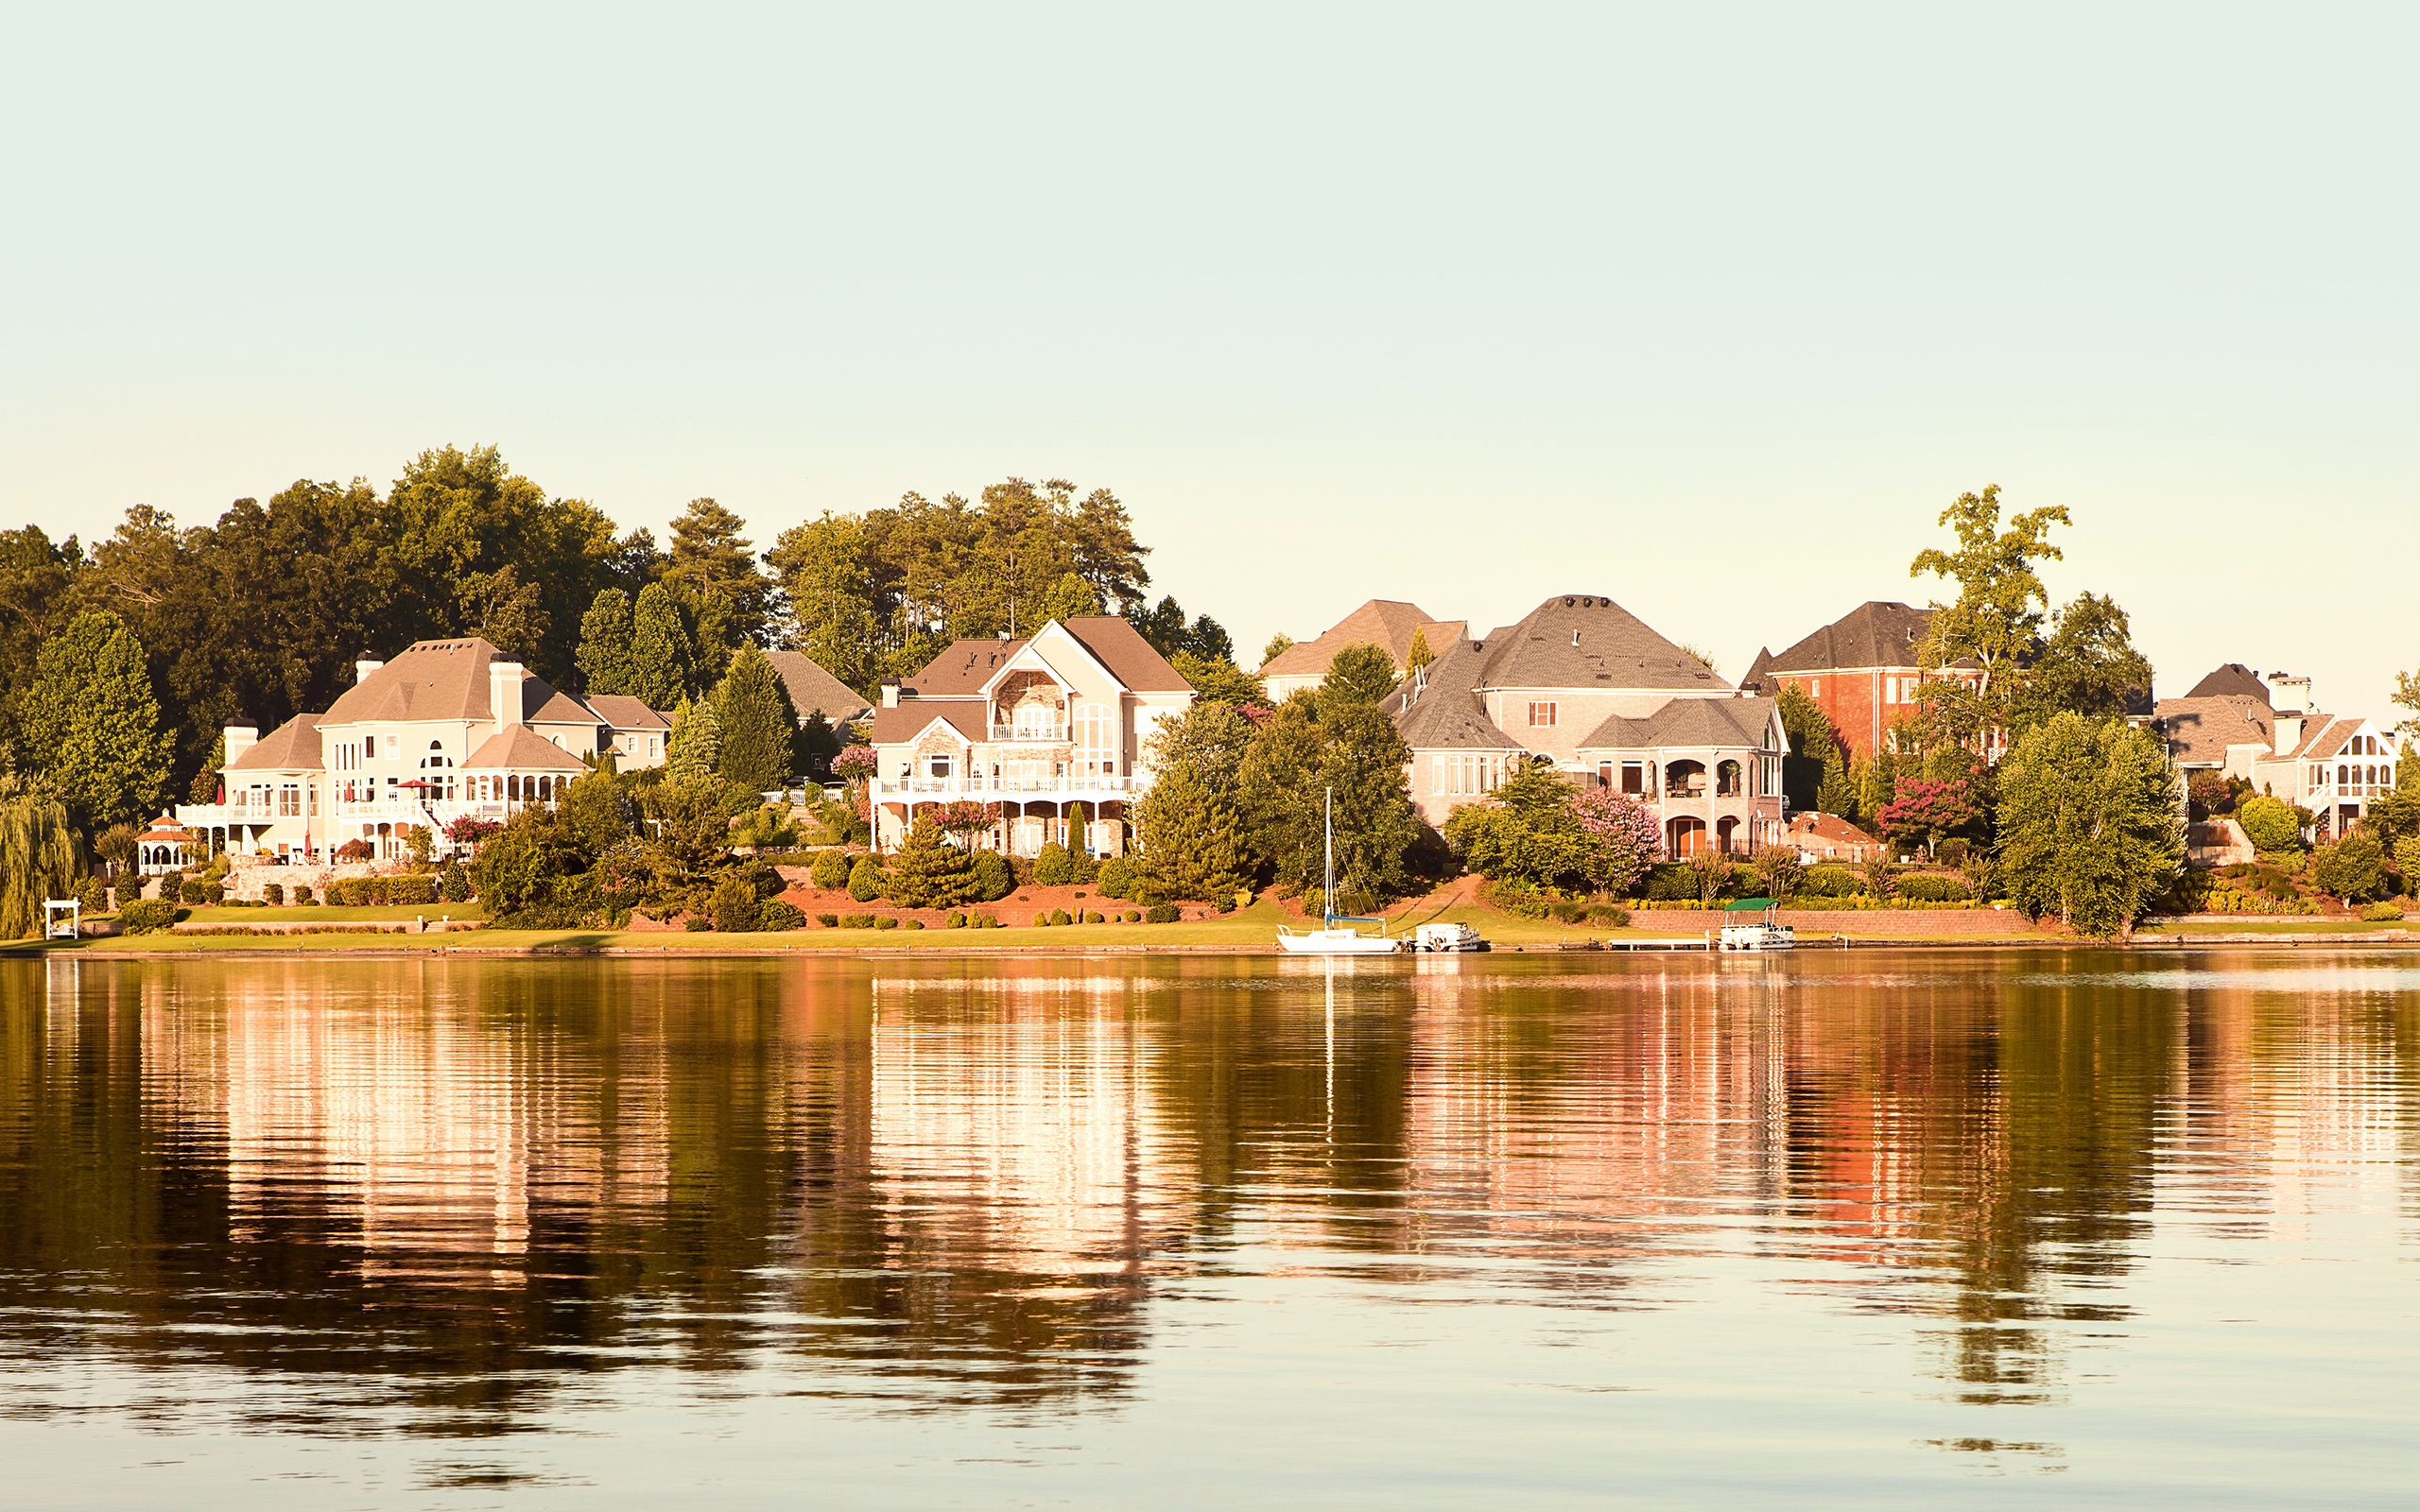 A row of luxury homes reflected in a lake.